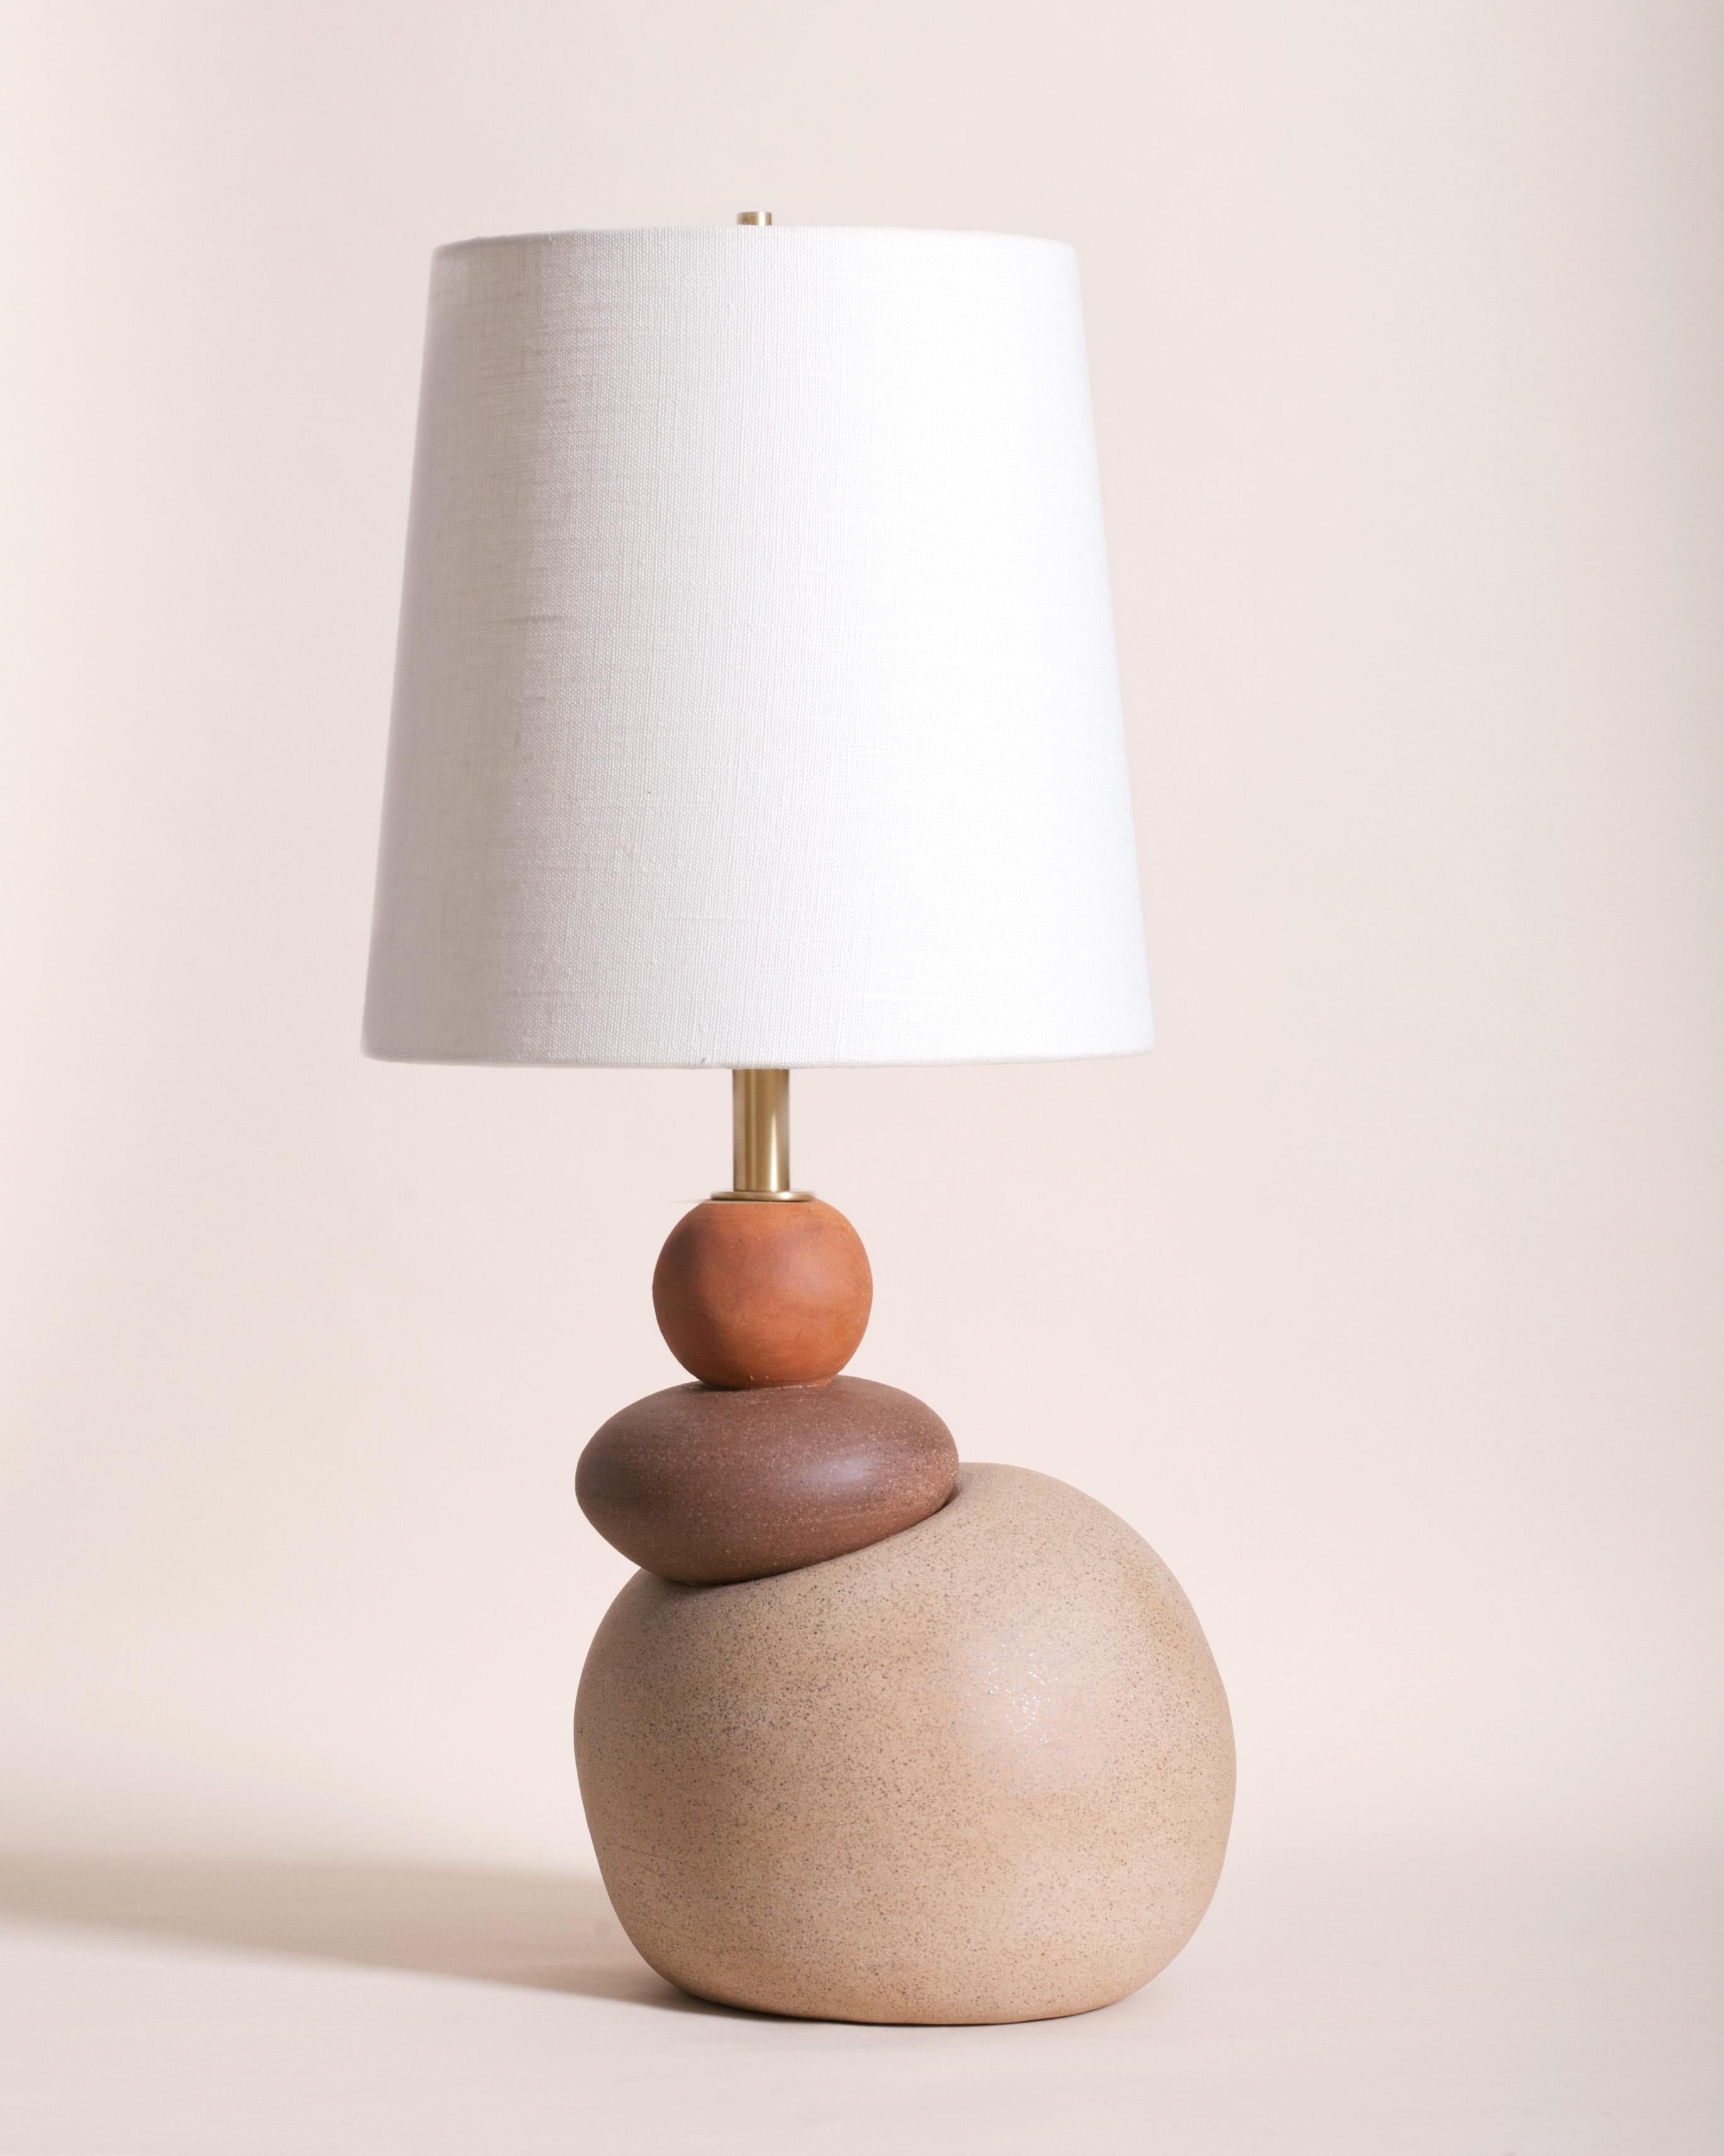 One of a kind ceramic lamp, thrown on the potters wheel and assembled by hand. The lamp base is comprised of three different clay bodies and features a raw, unglazed ceramic surface to highlight the texture of natural clay. This piece was inspired